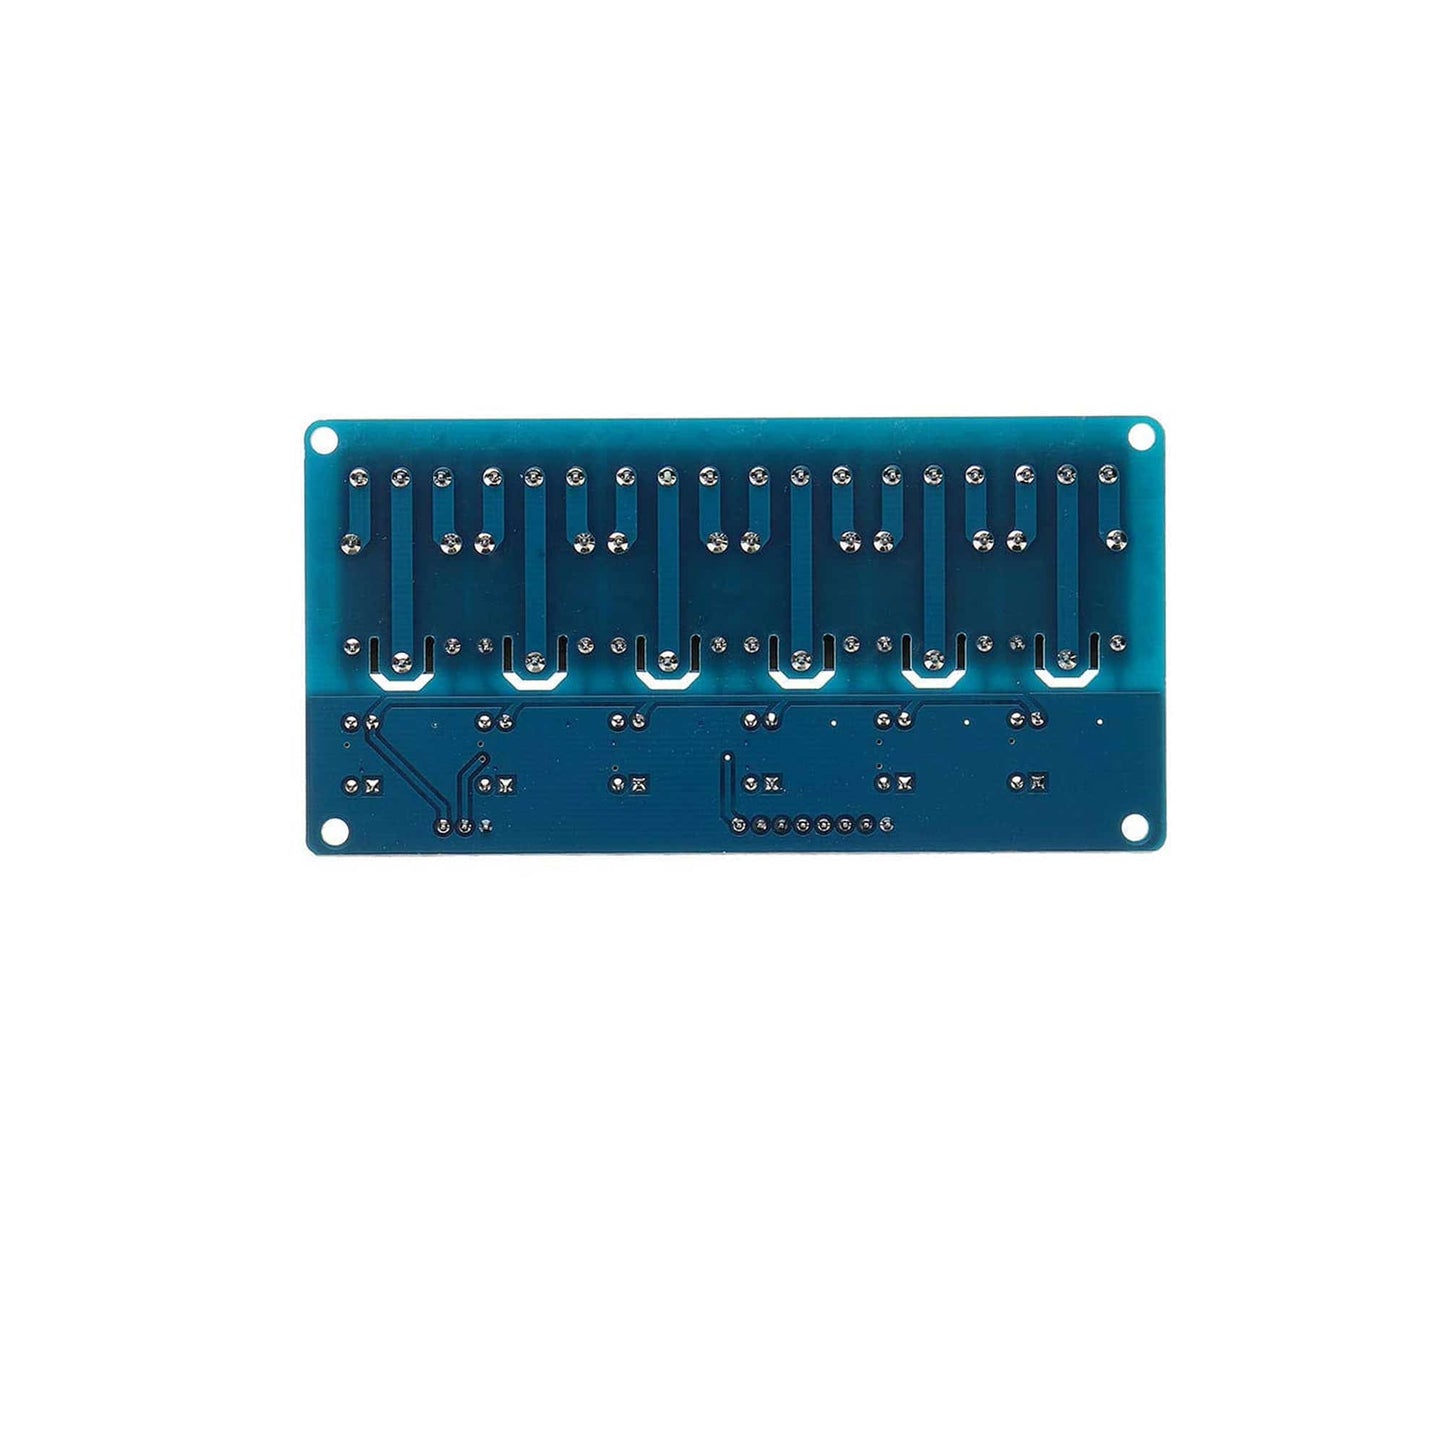 Relay Module- 12V 6 Channel Relay Module with Light Coupling